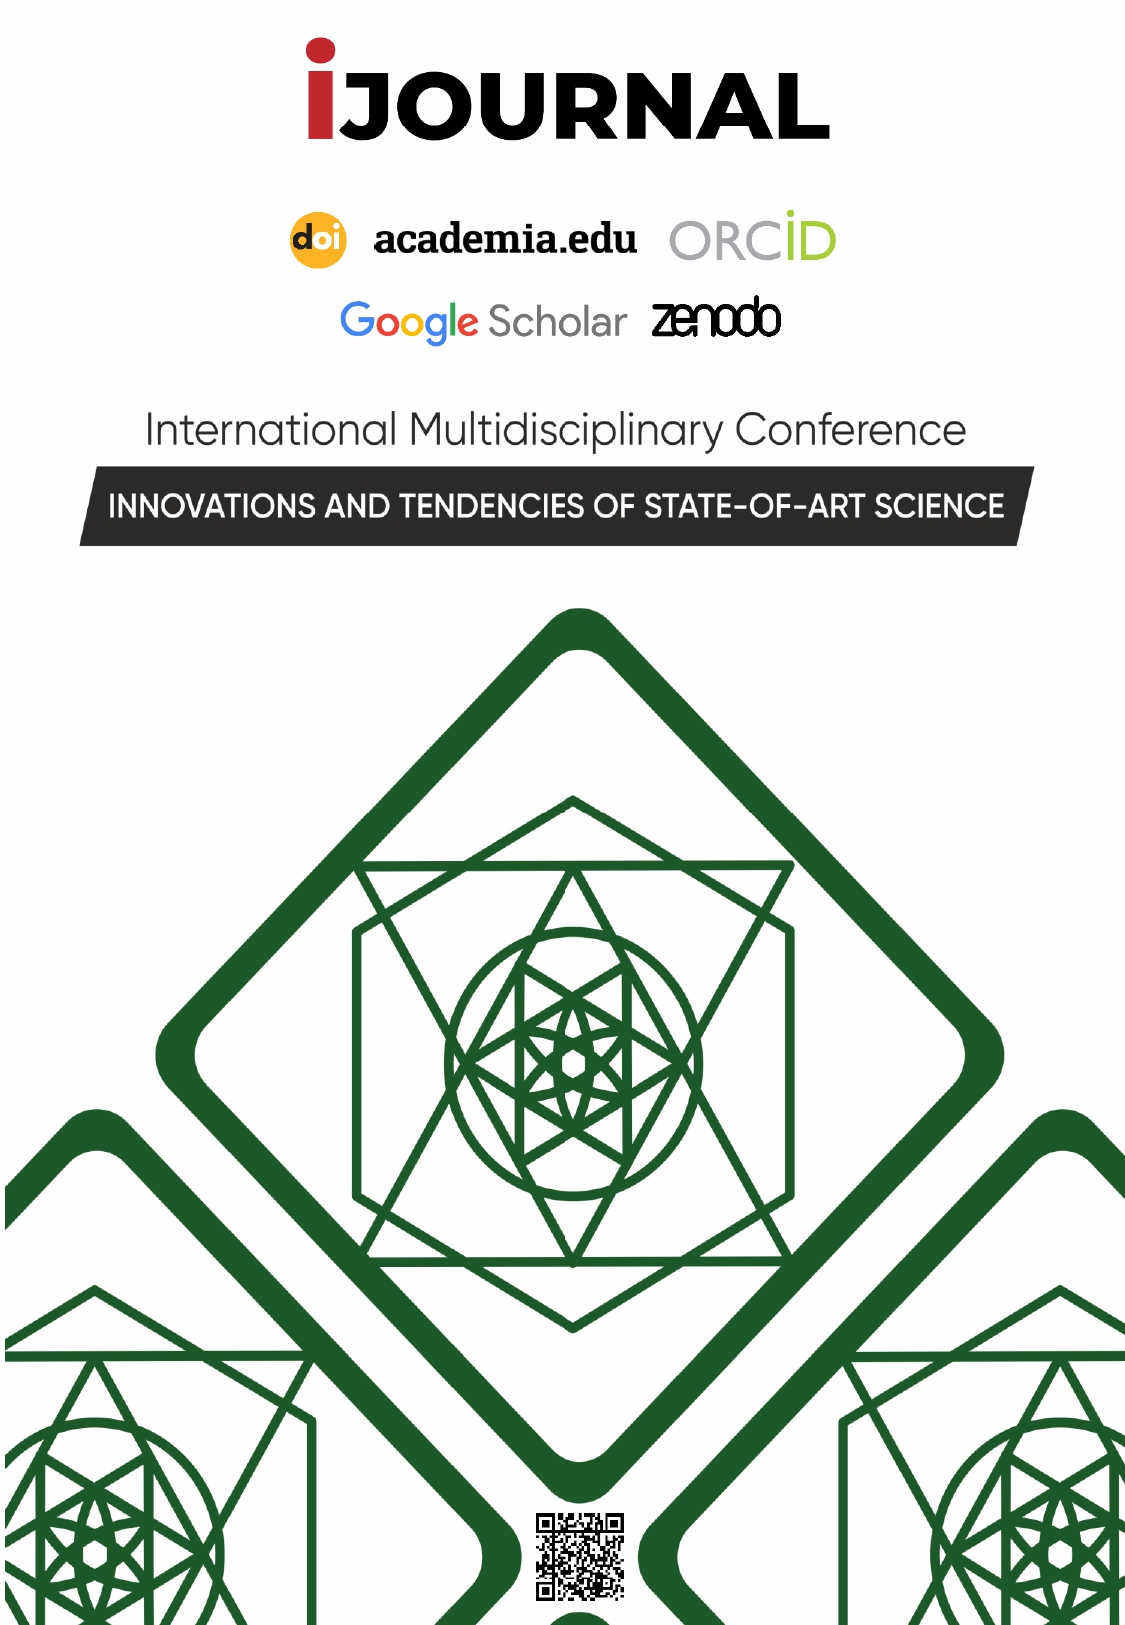 					View 2023: International Multidisciplinary Conference “Innovations and Tendencies of State-of-Art Science”
				